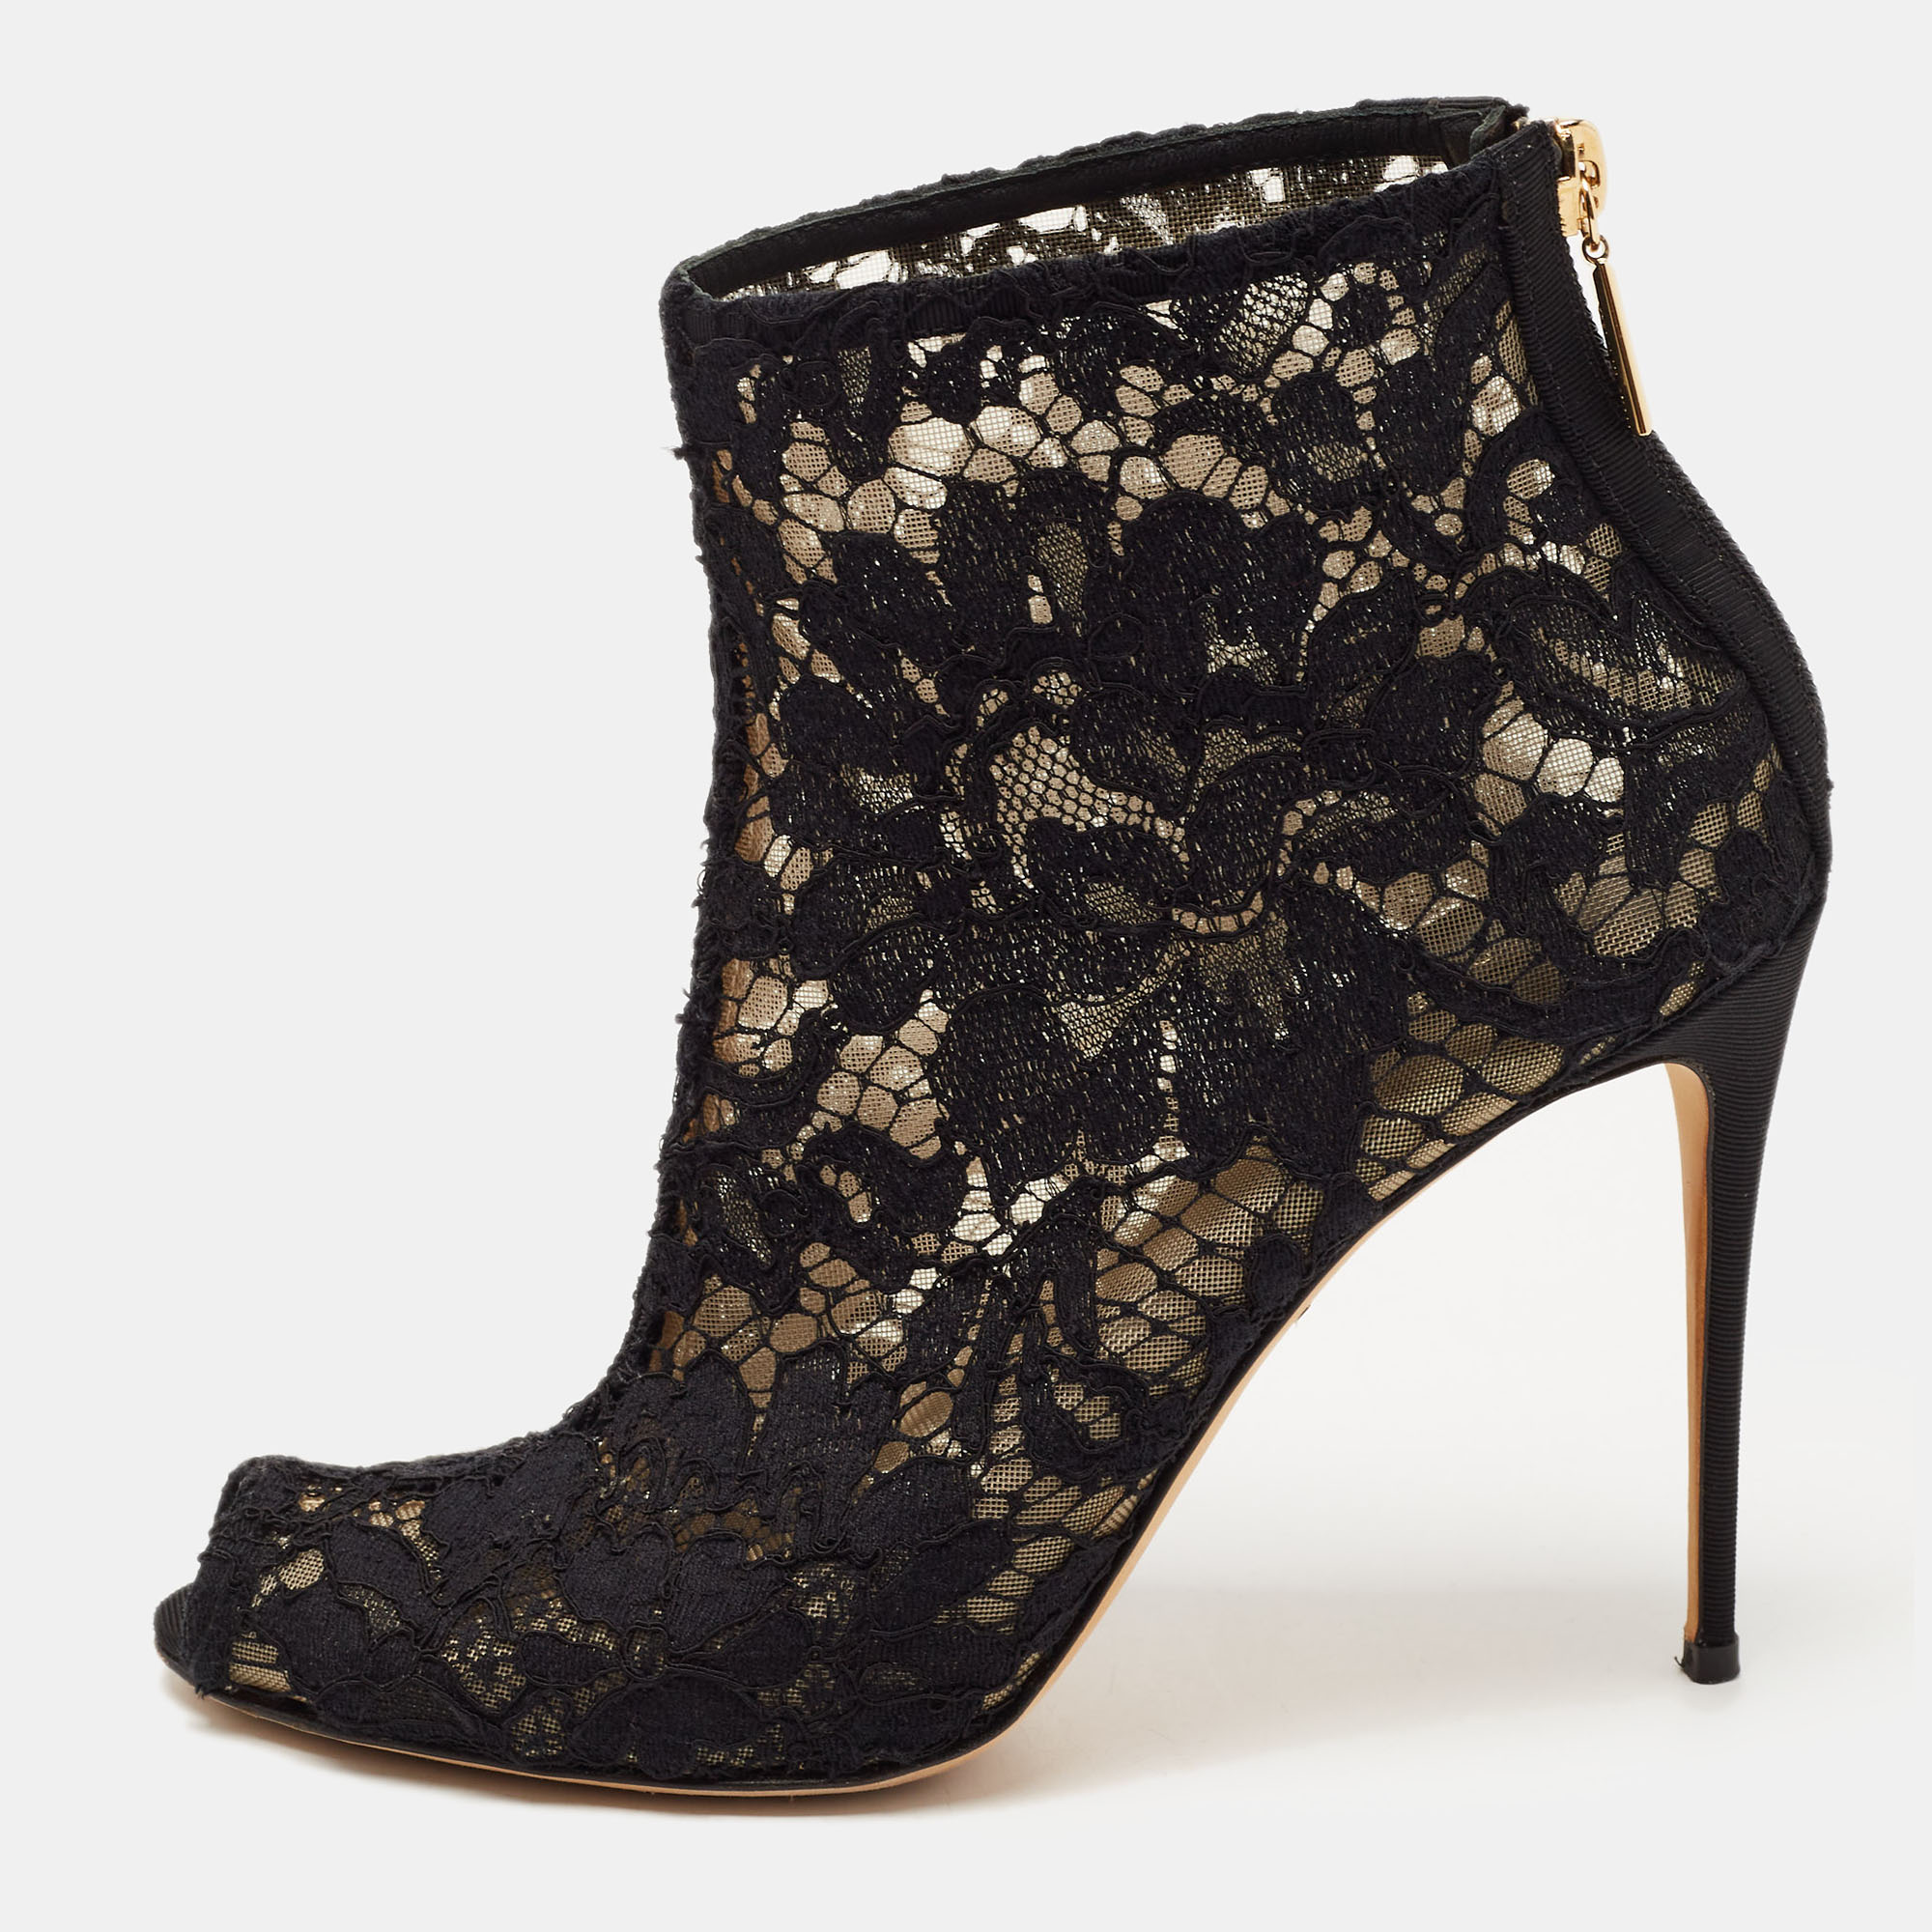 Pre-owned Dolce & Gabbana Black Lace And Mesh Ankle Boots Size 37.5